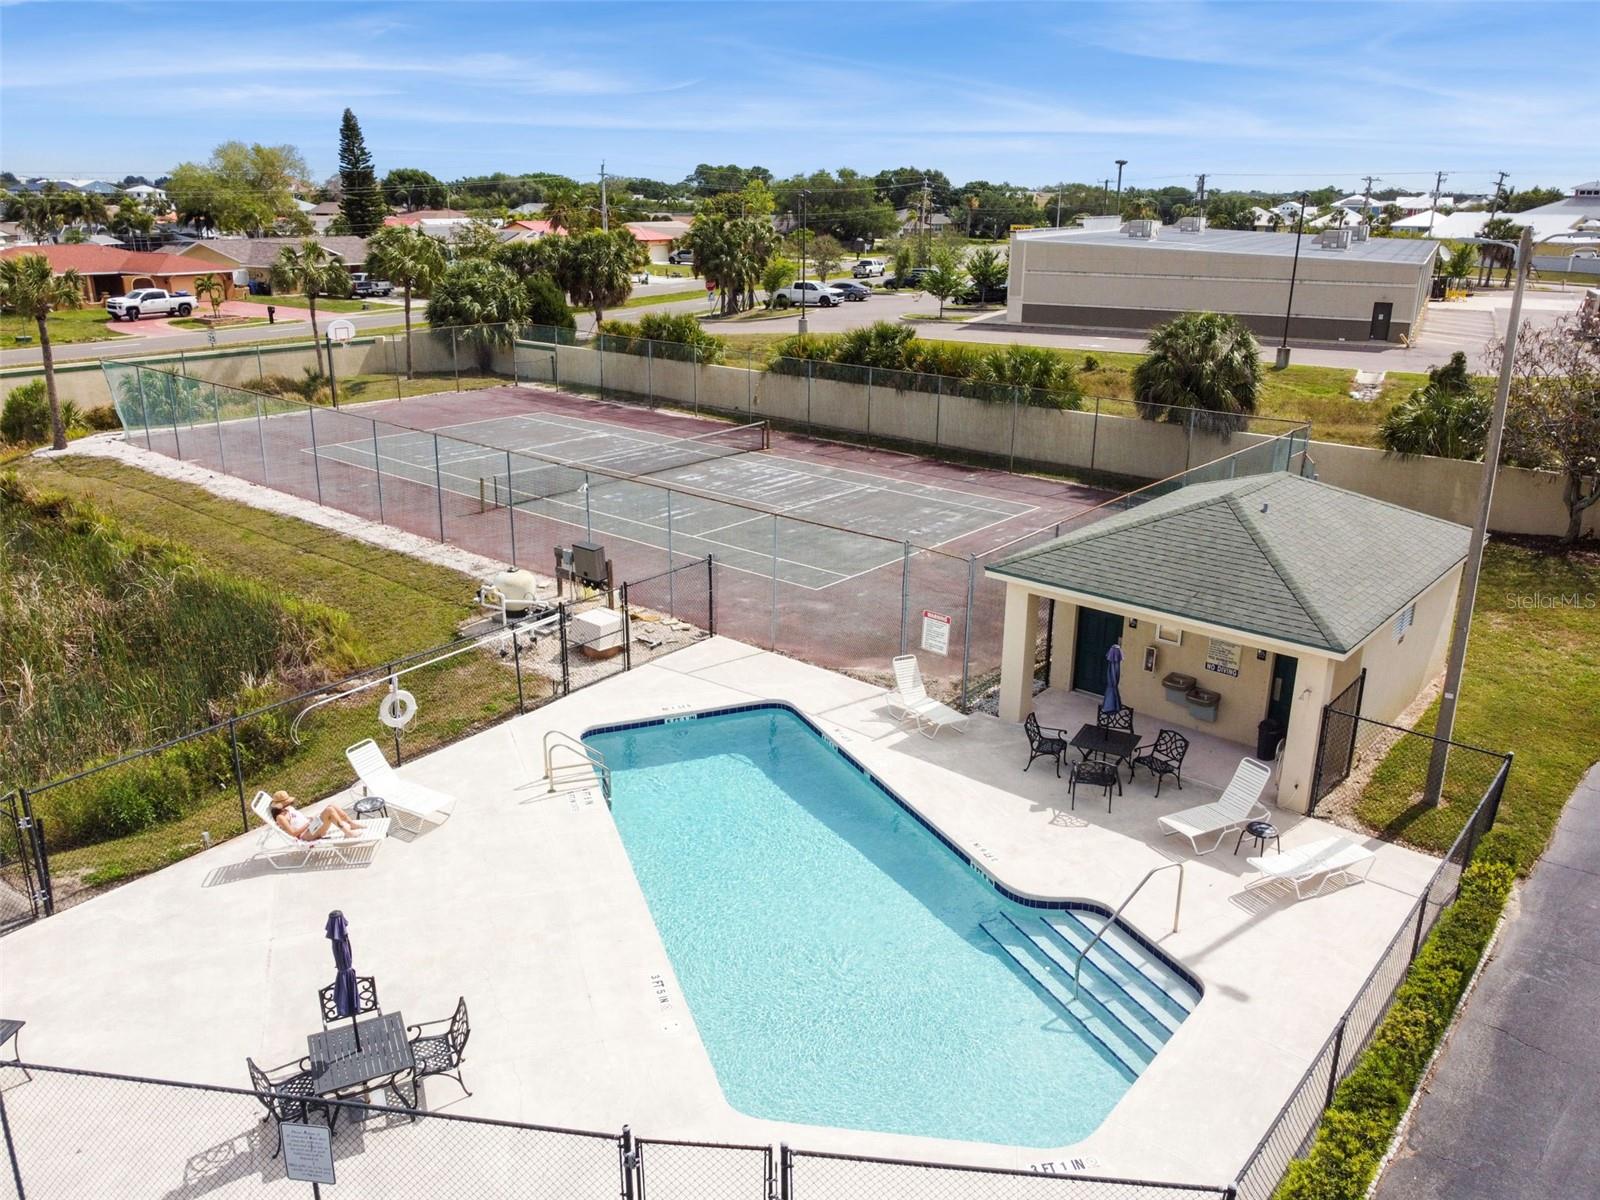 Community pool and tennis court.